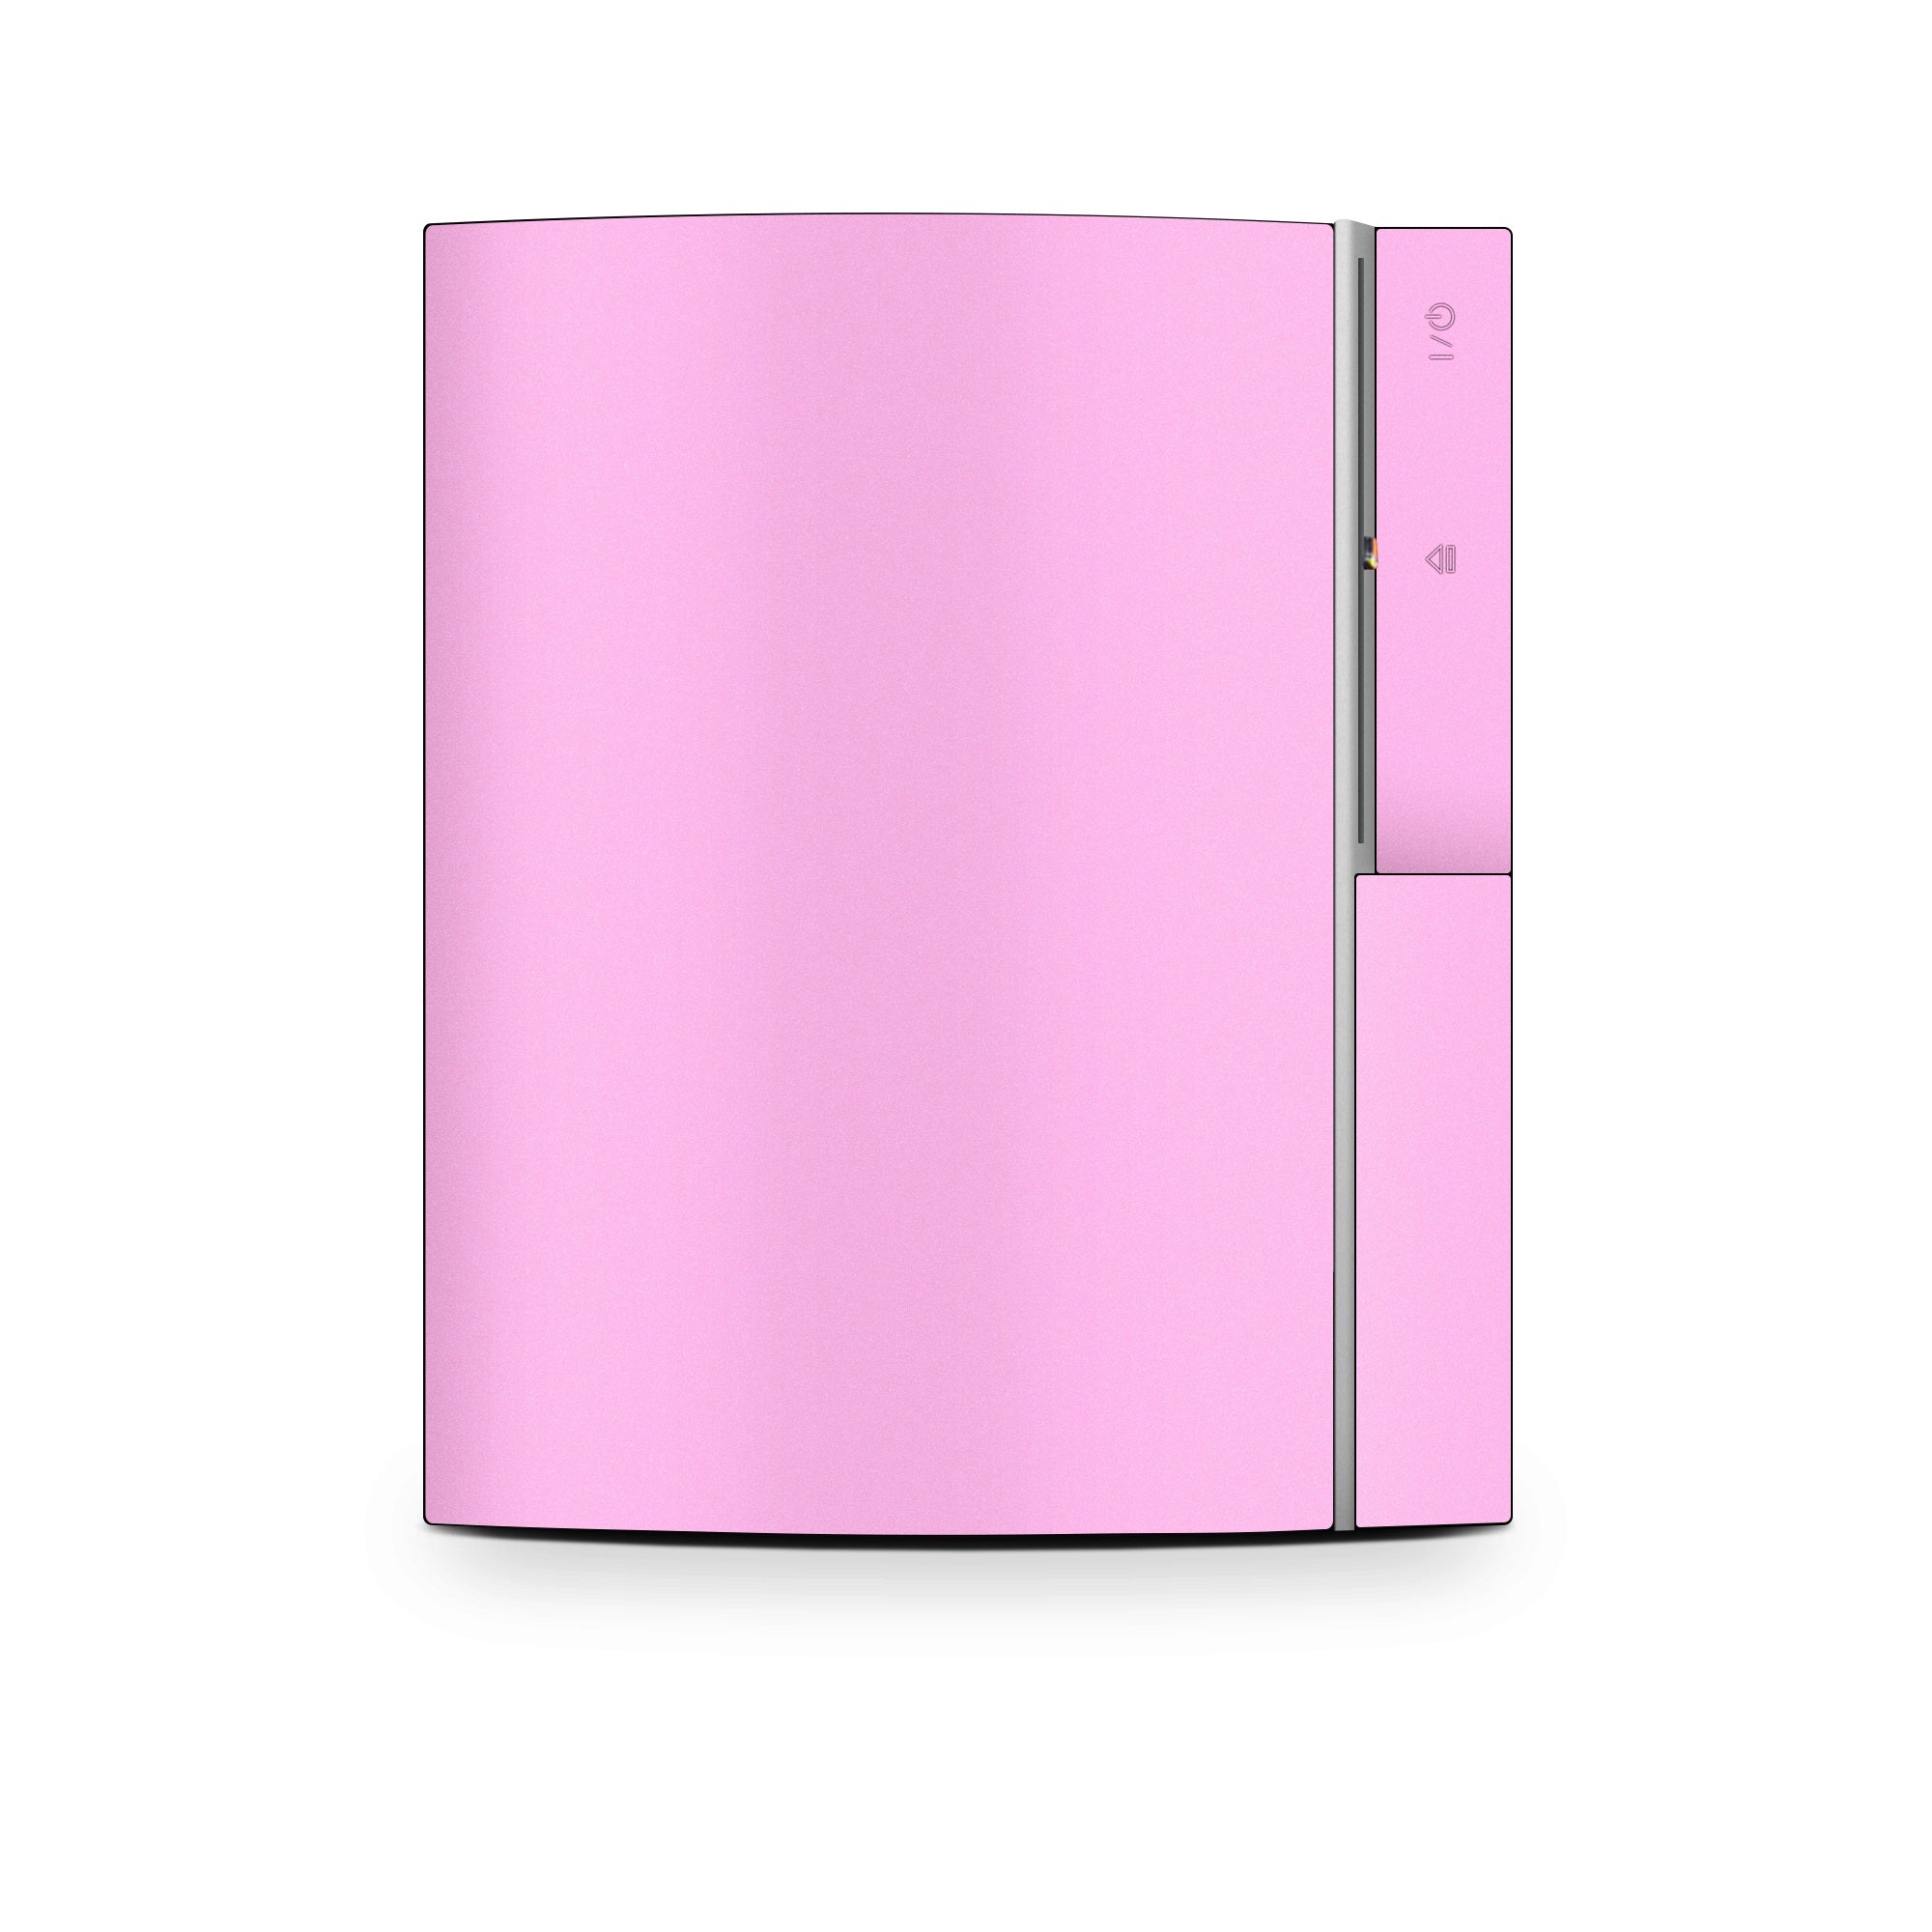 Solid State Pink - Sony PS3 Skin